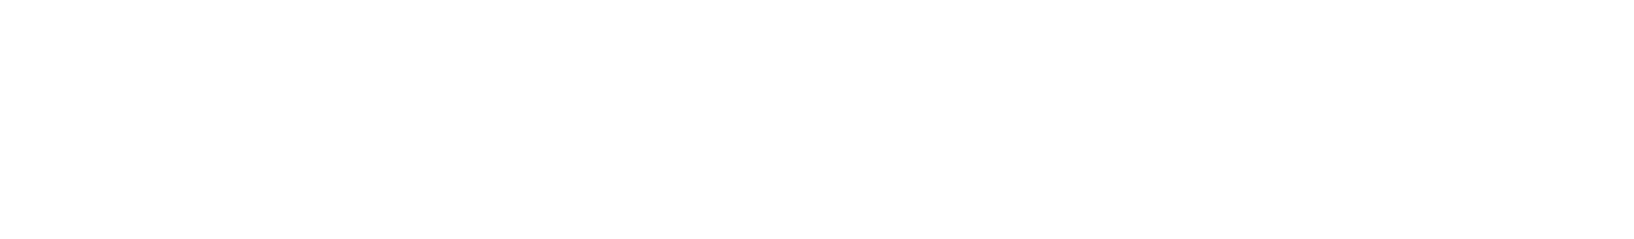 johnny-morris'-conservation-attractions